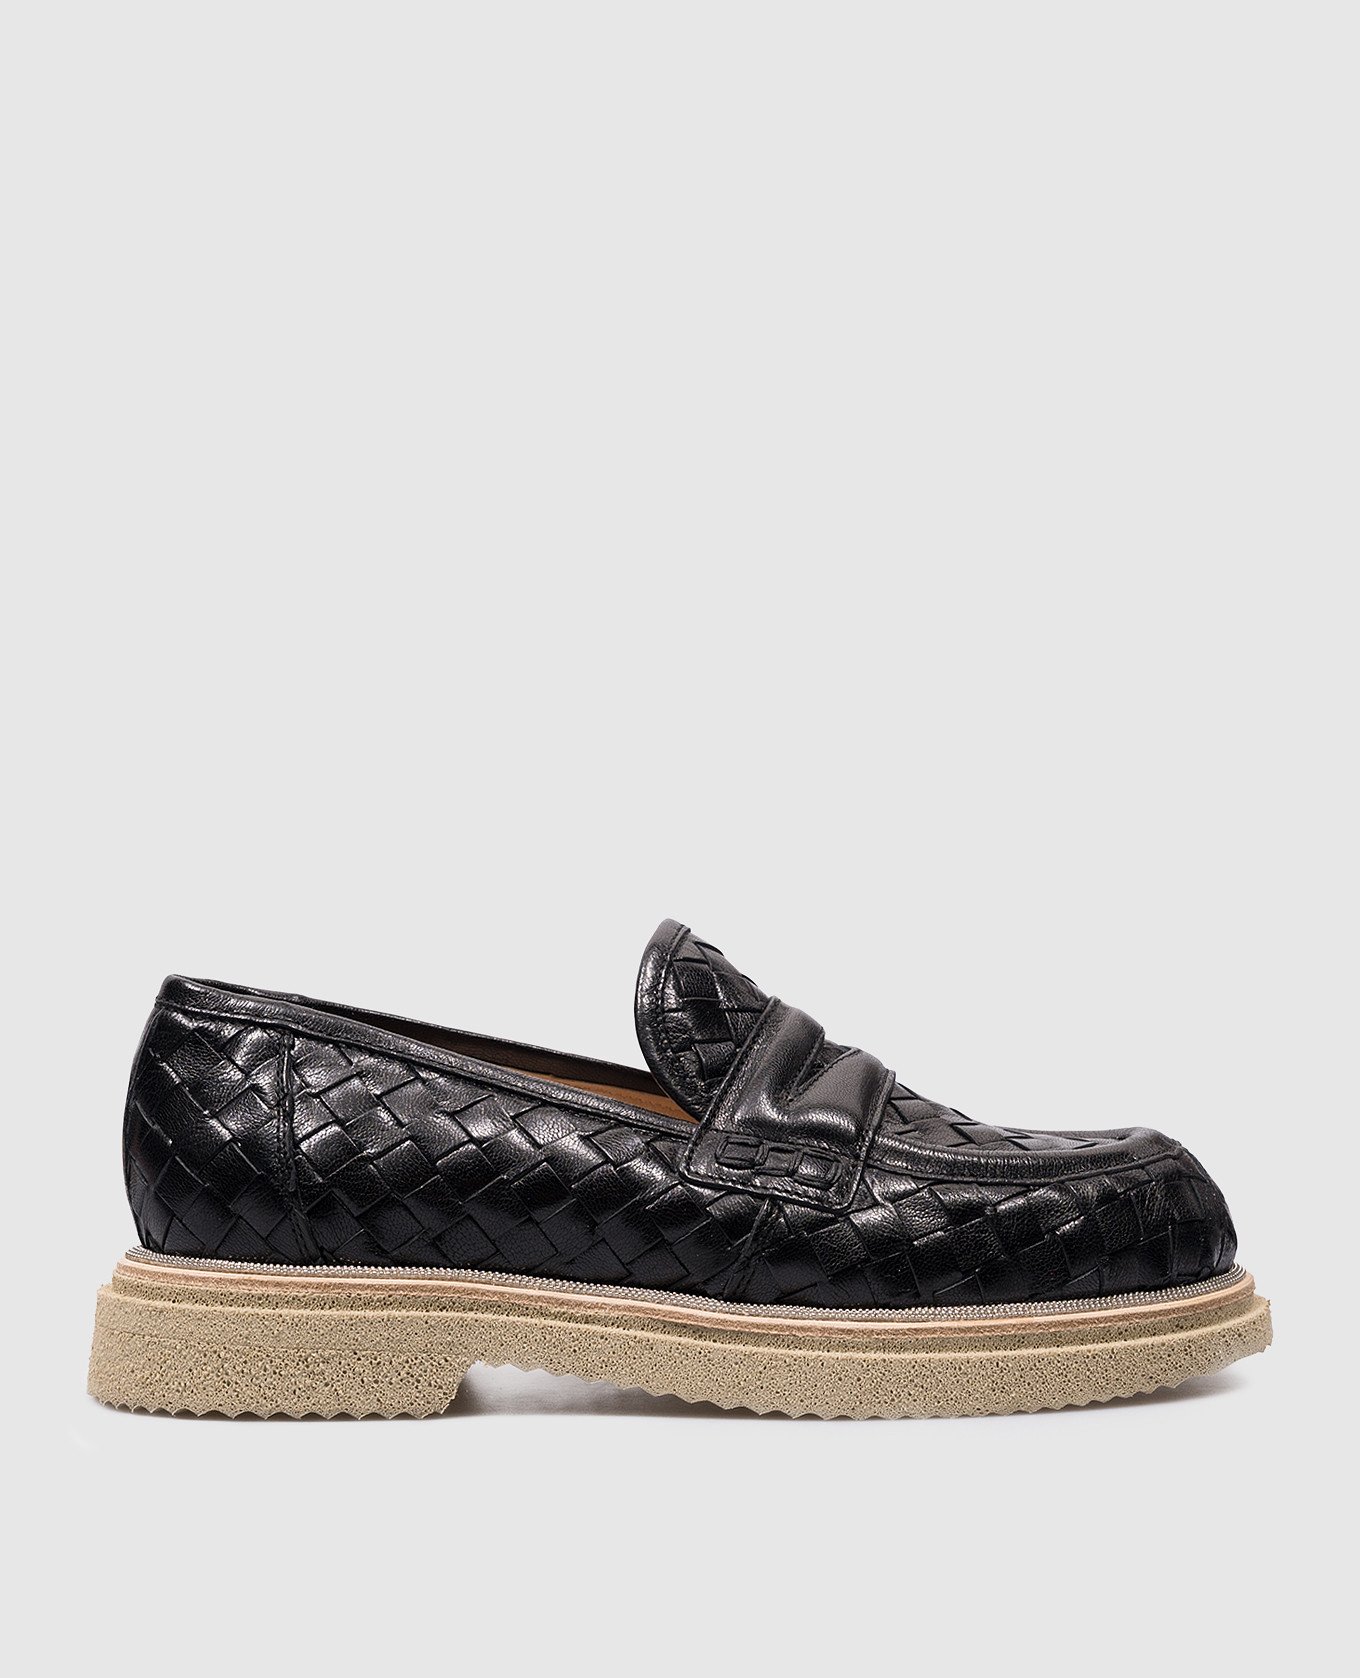 Black leather braided loafers